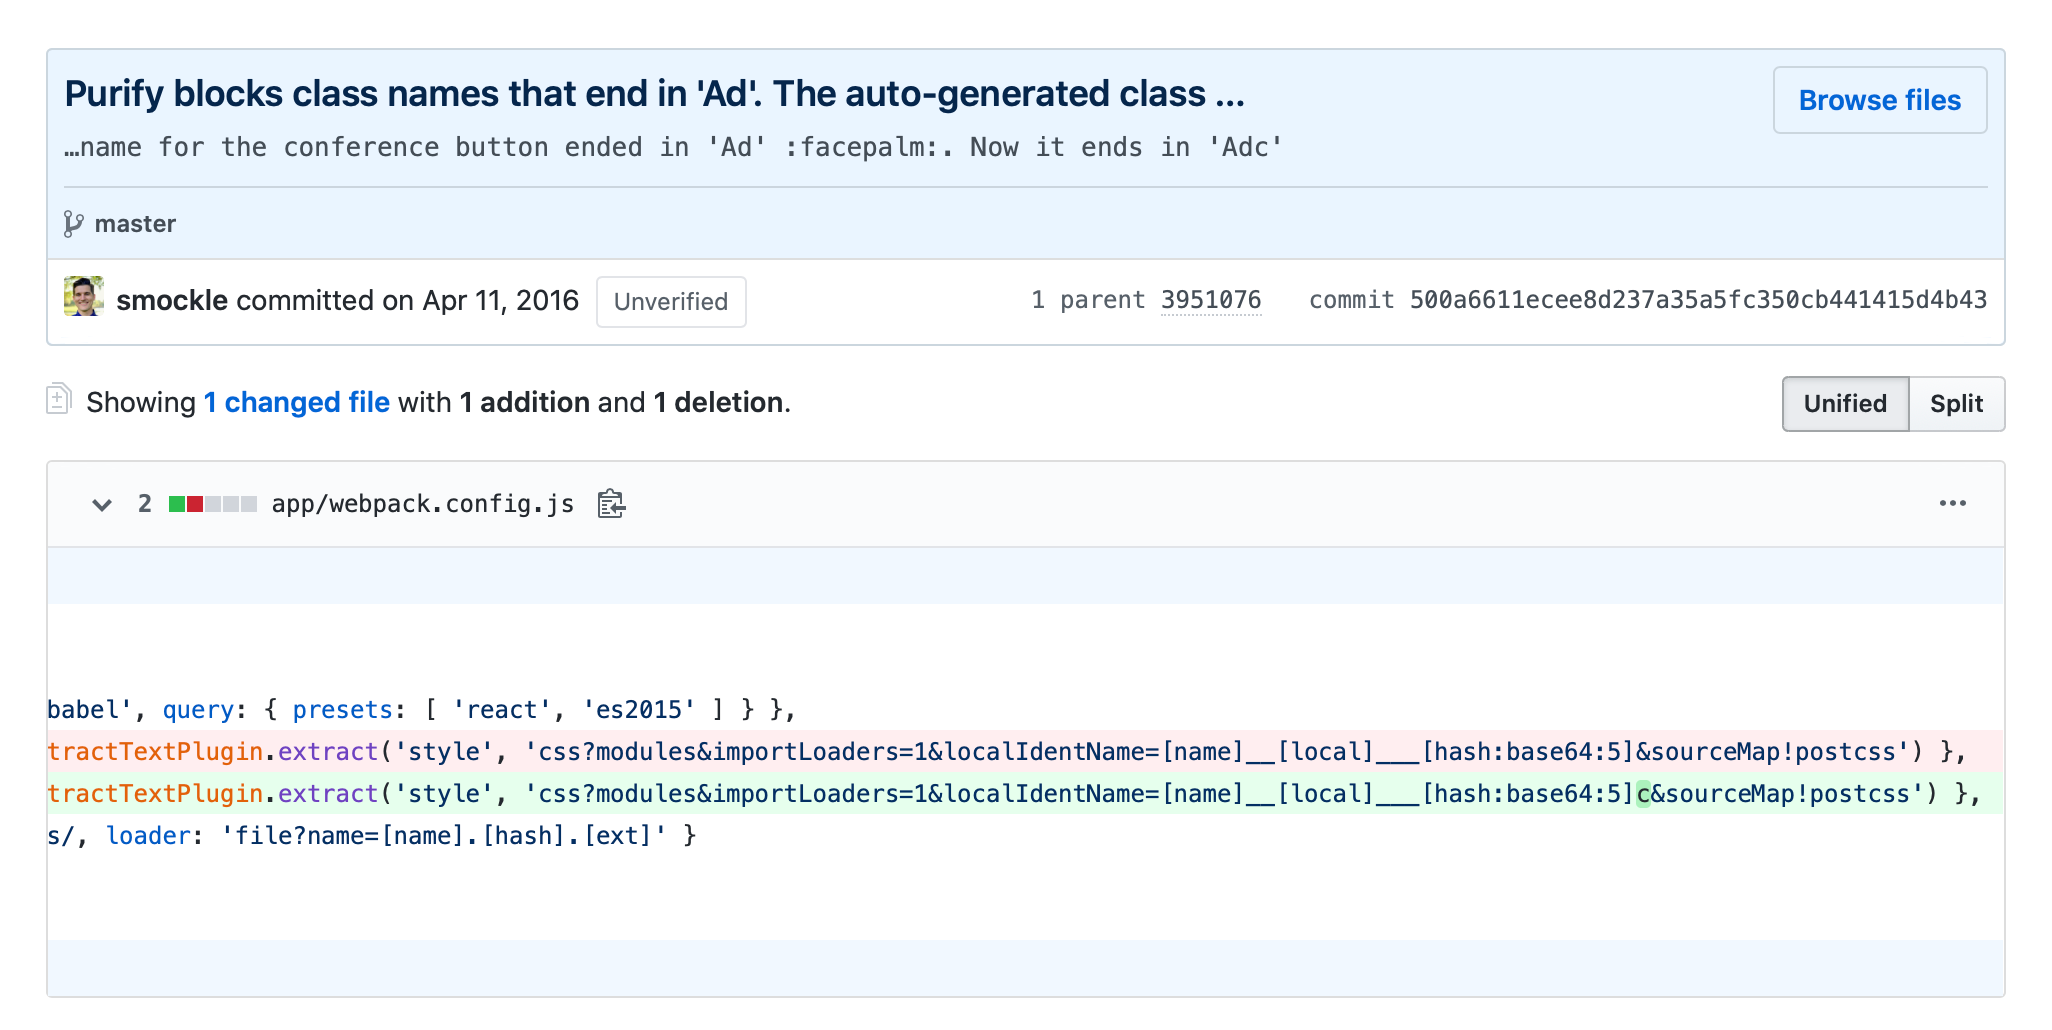 A commit displayed in GitHub showing a one-line change to the Webpack config from Clay, with the commit message “Purify blocks class names that end in 'Ad'. The auto-generated class name for the conference button ended in 'Ad' :facepalm:. Now it ends in 'Adc'.”